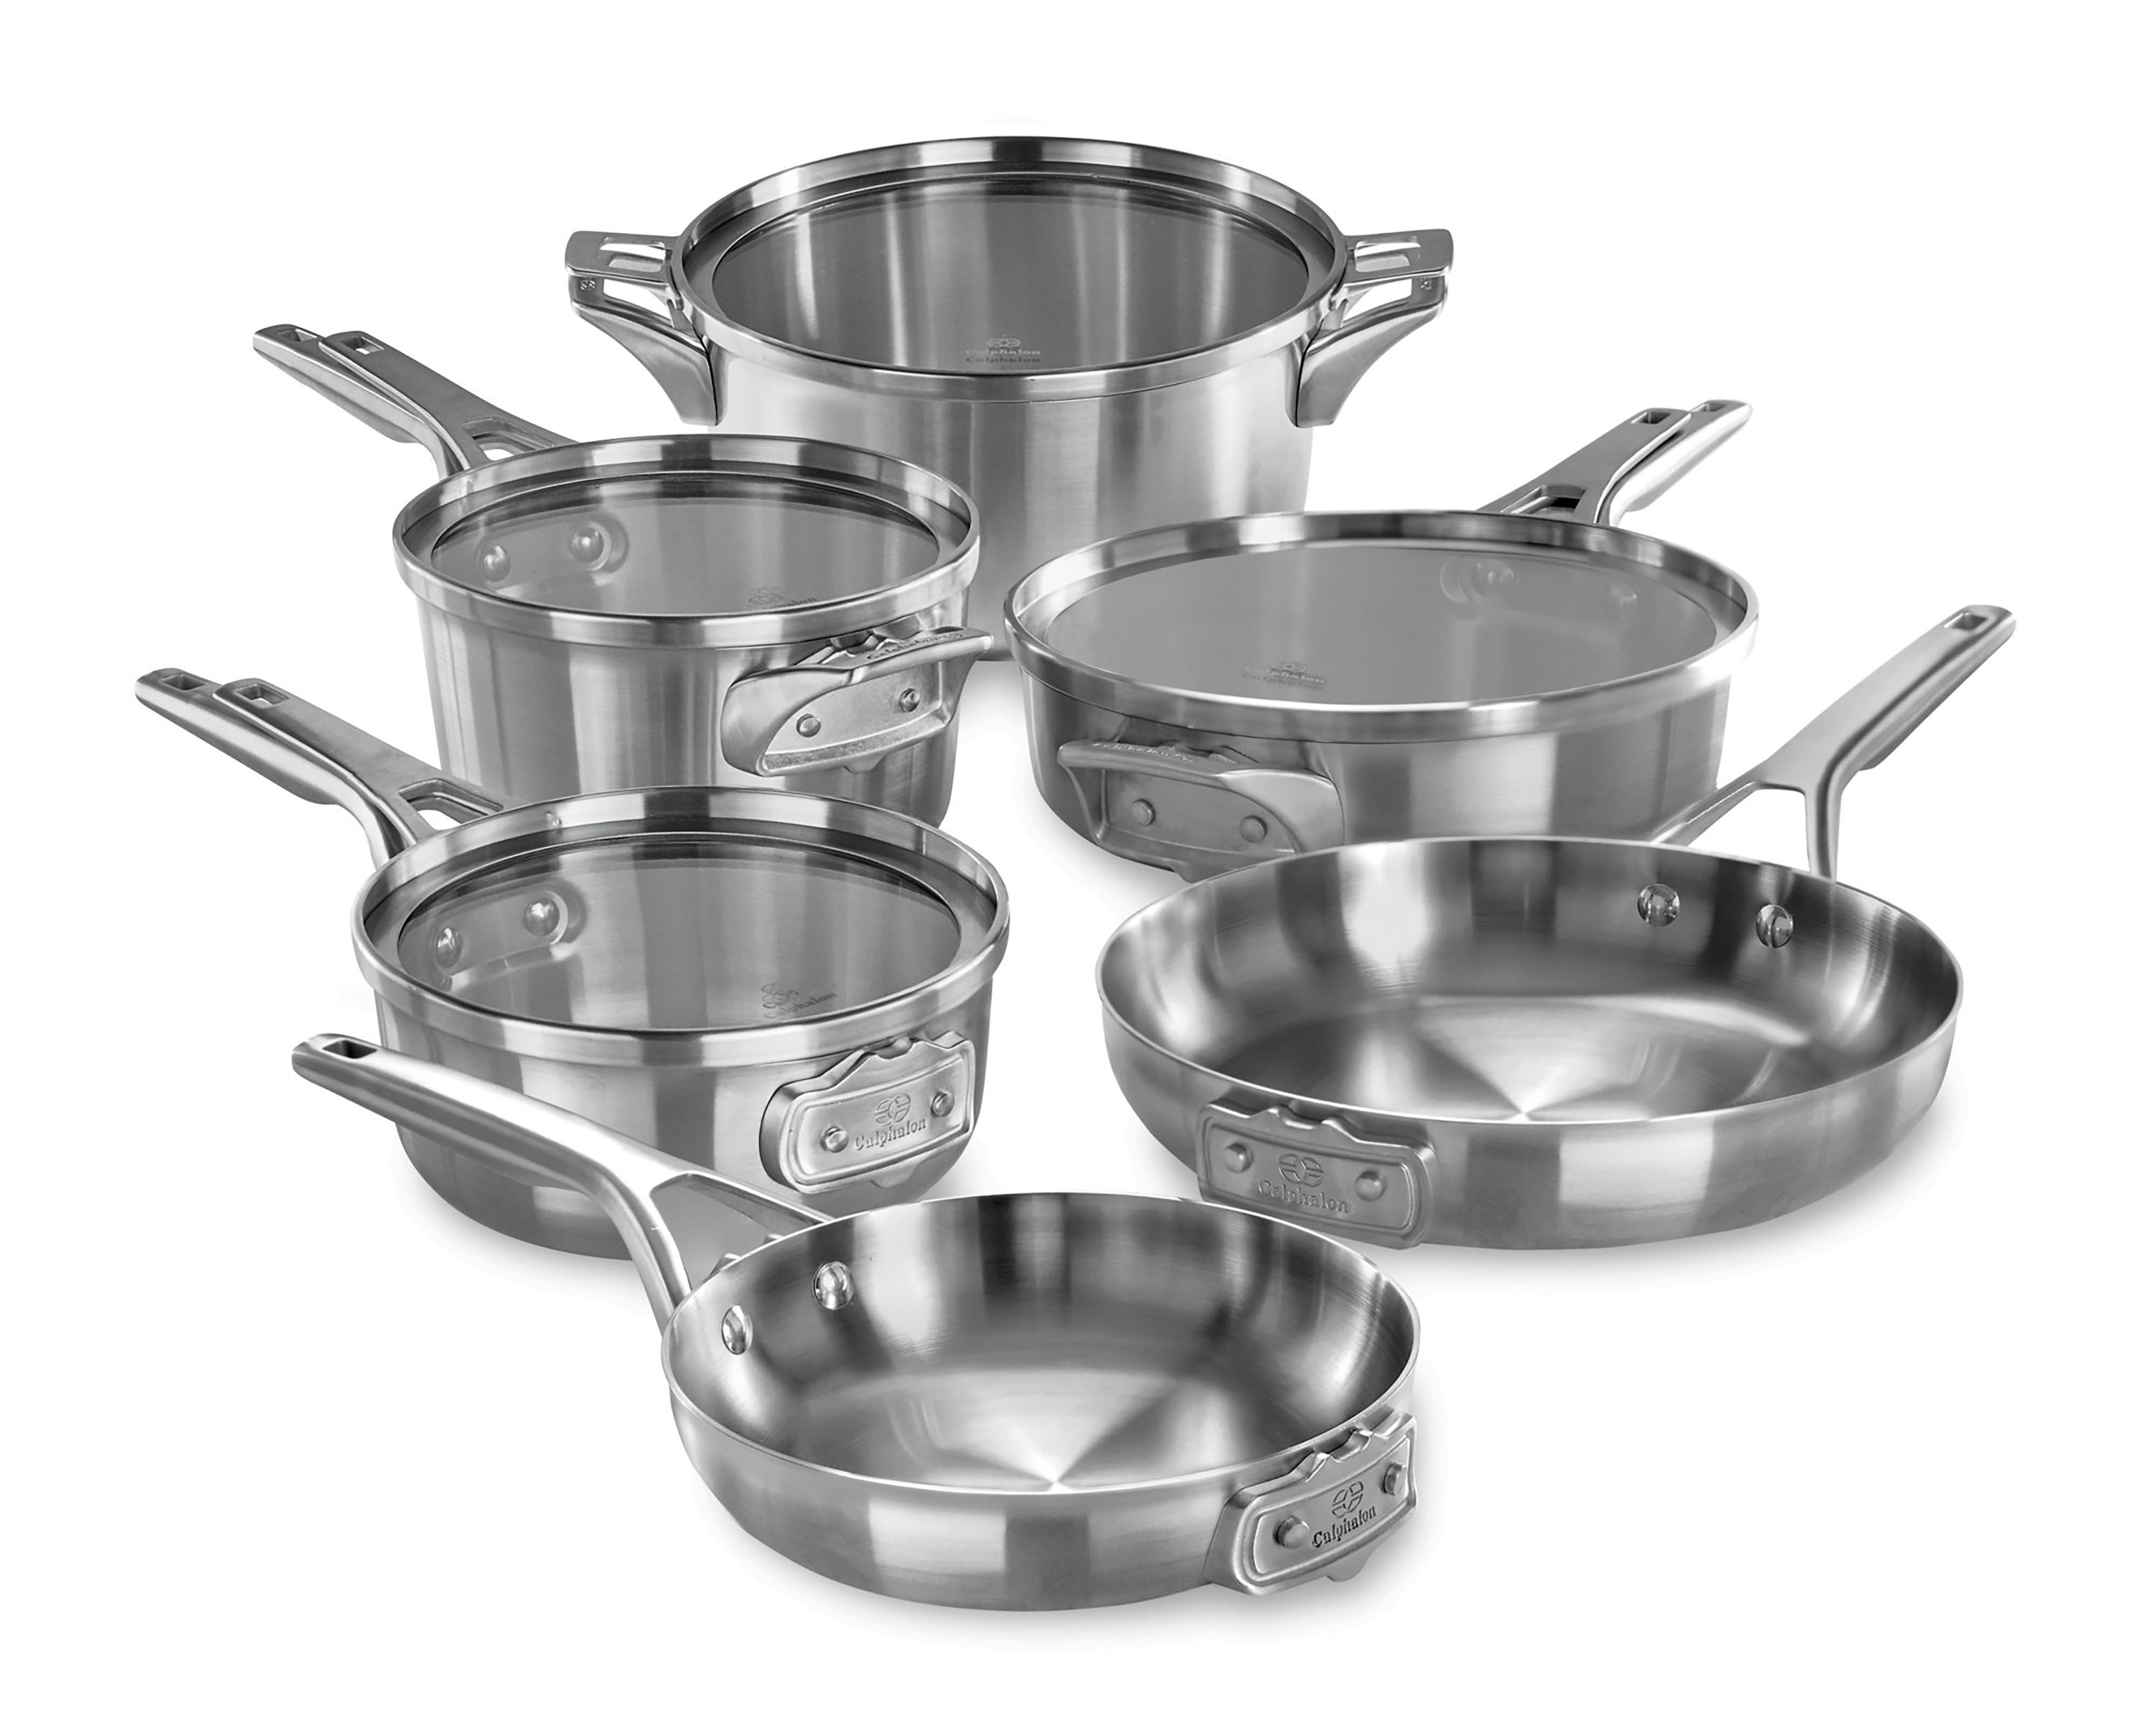 Set of 10 Stainless Steel Calphalon Premier Space Saving Cookware for sale online 2010605 